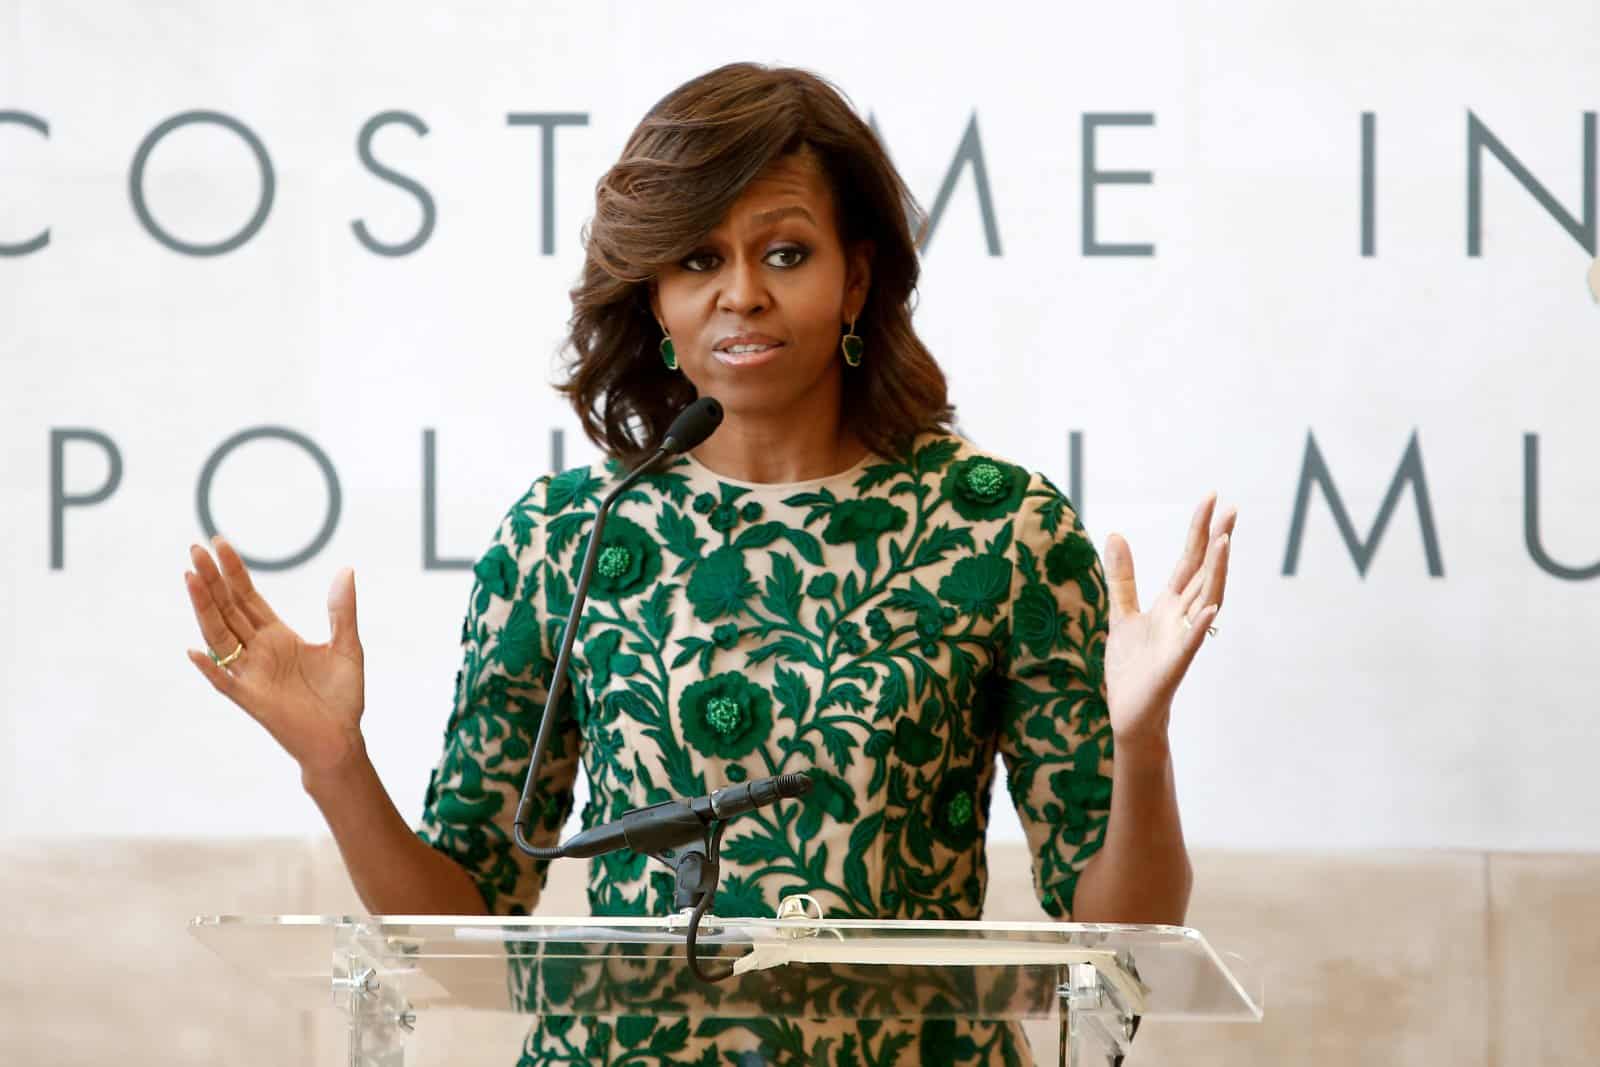 Image Credit: Shutterstock / Debby Wong <p><span>Michelle Obama’s powerful address promotes empathy, unity, and the importance of upholding American values, while also advocating for gender equality and the rights of women and girls.</span></p>